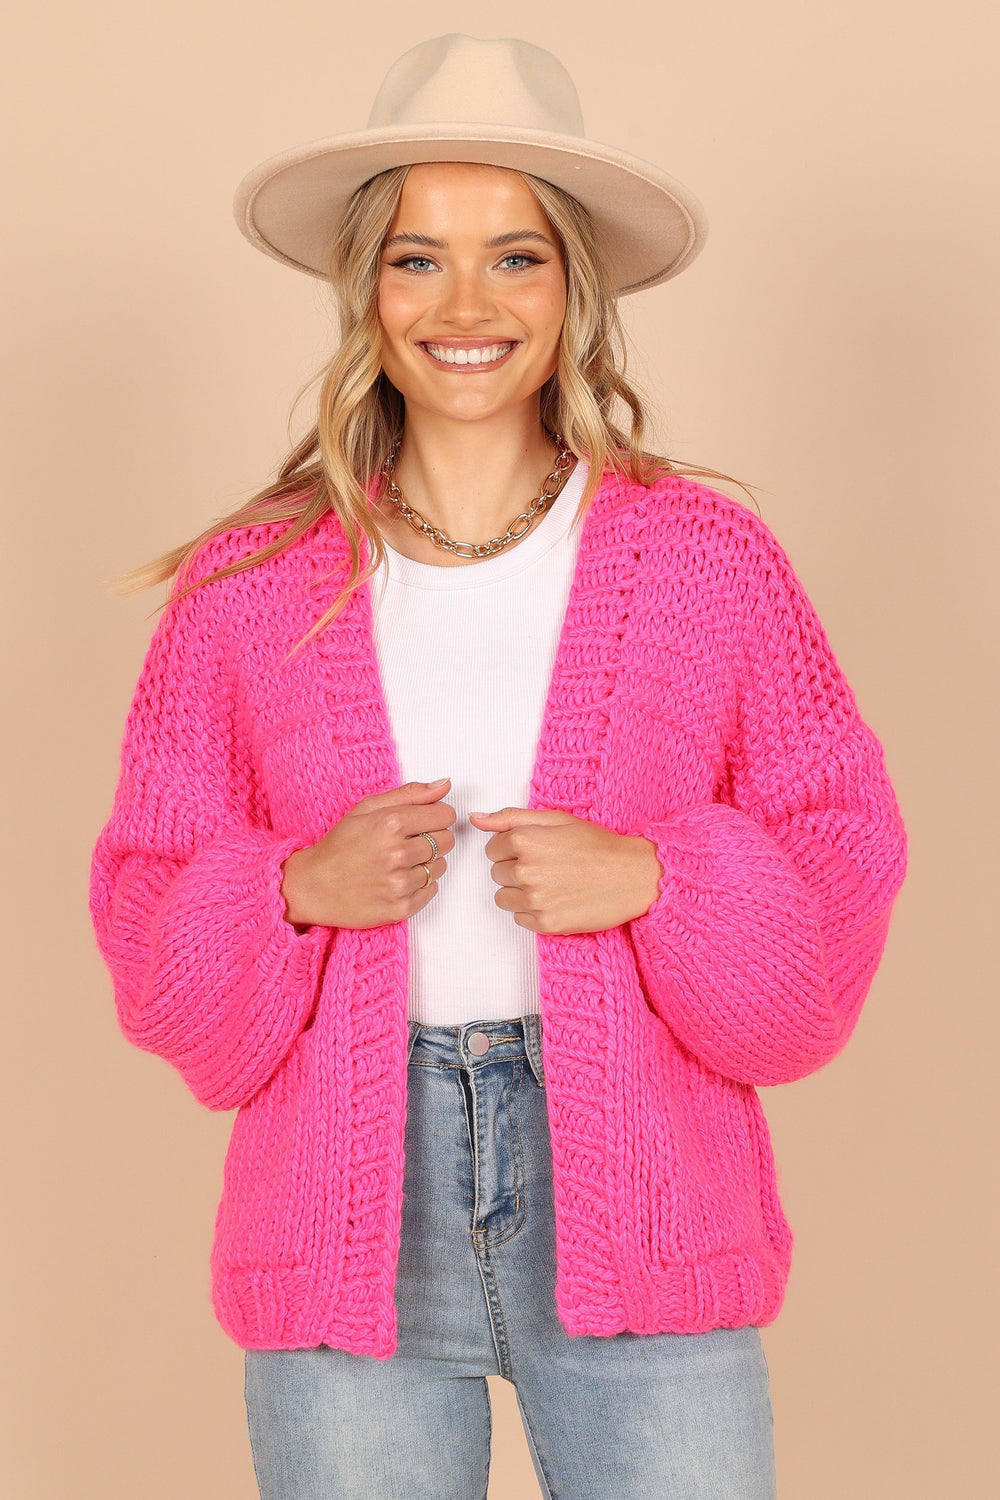 River Island chunky bubble crop cardigan in light pink